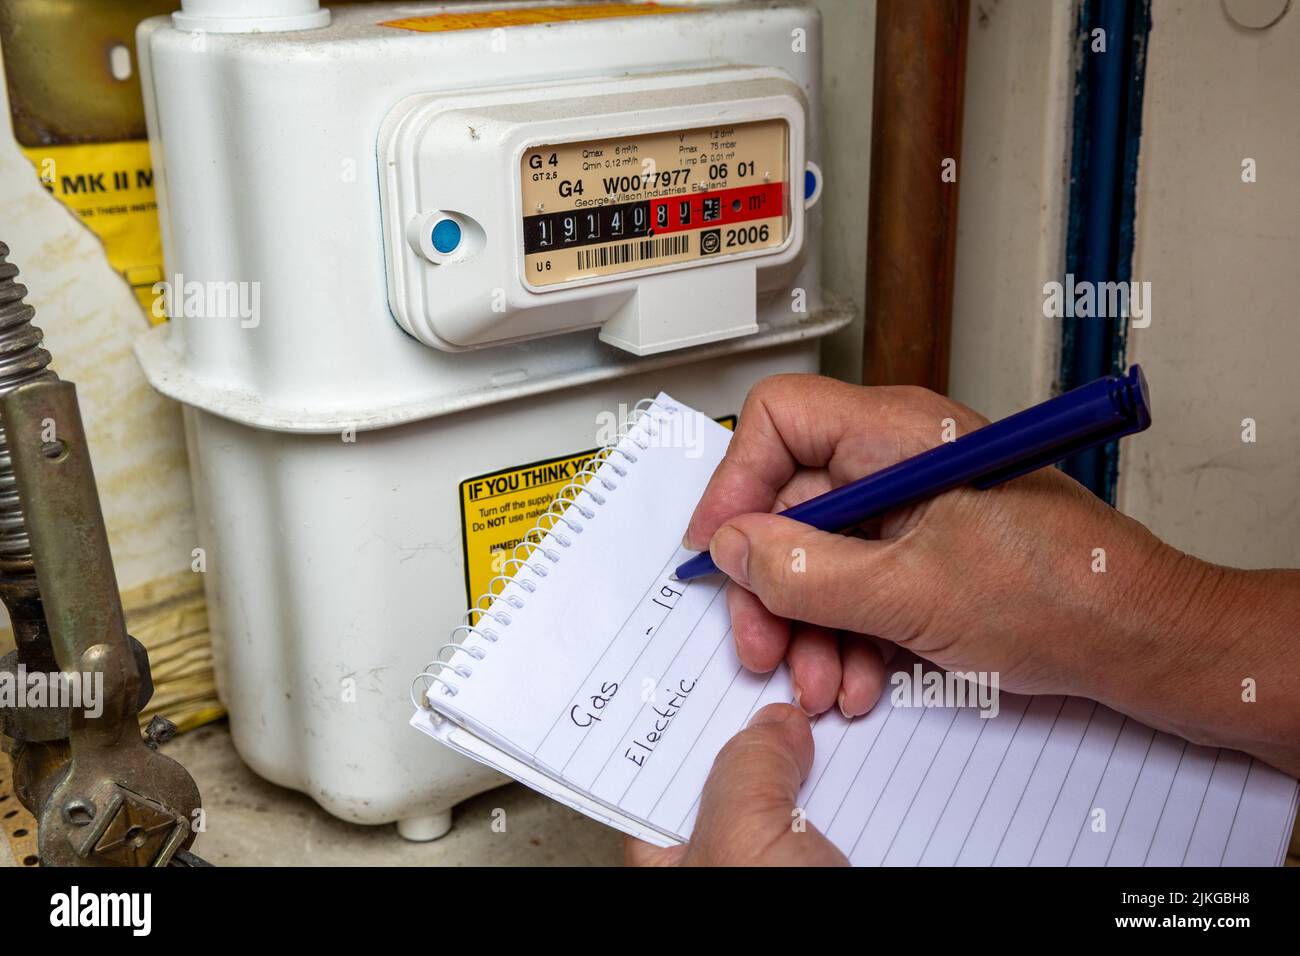 Taking a domestic gas meter reading, UK Stock Photo